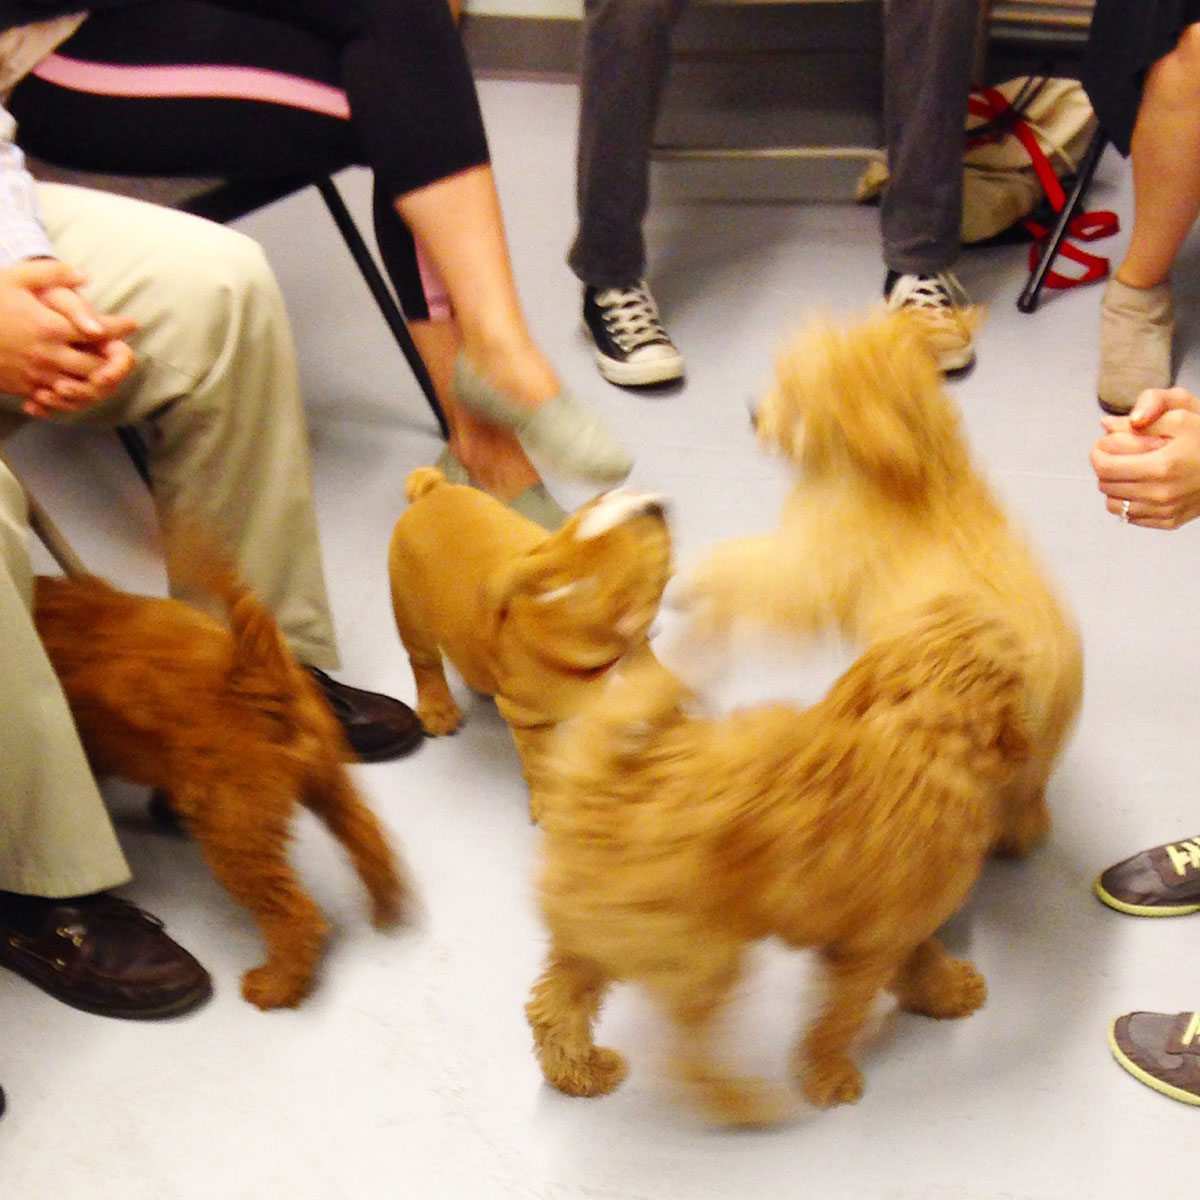 Doodle puppies playing between their owner's legs